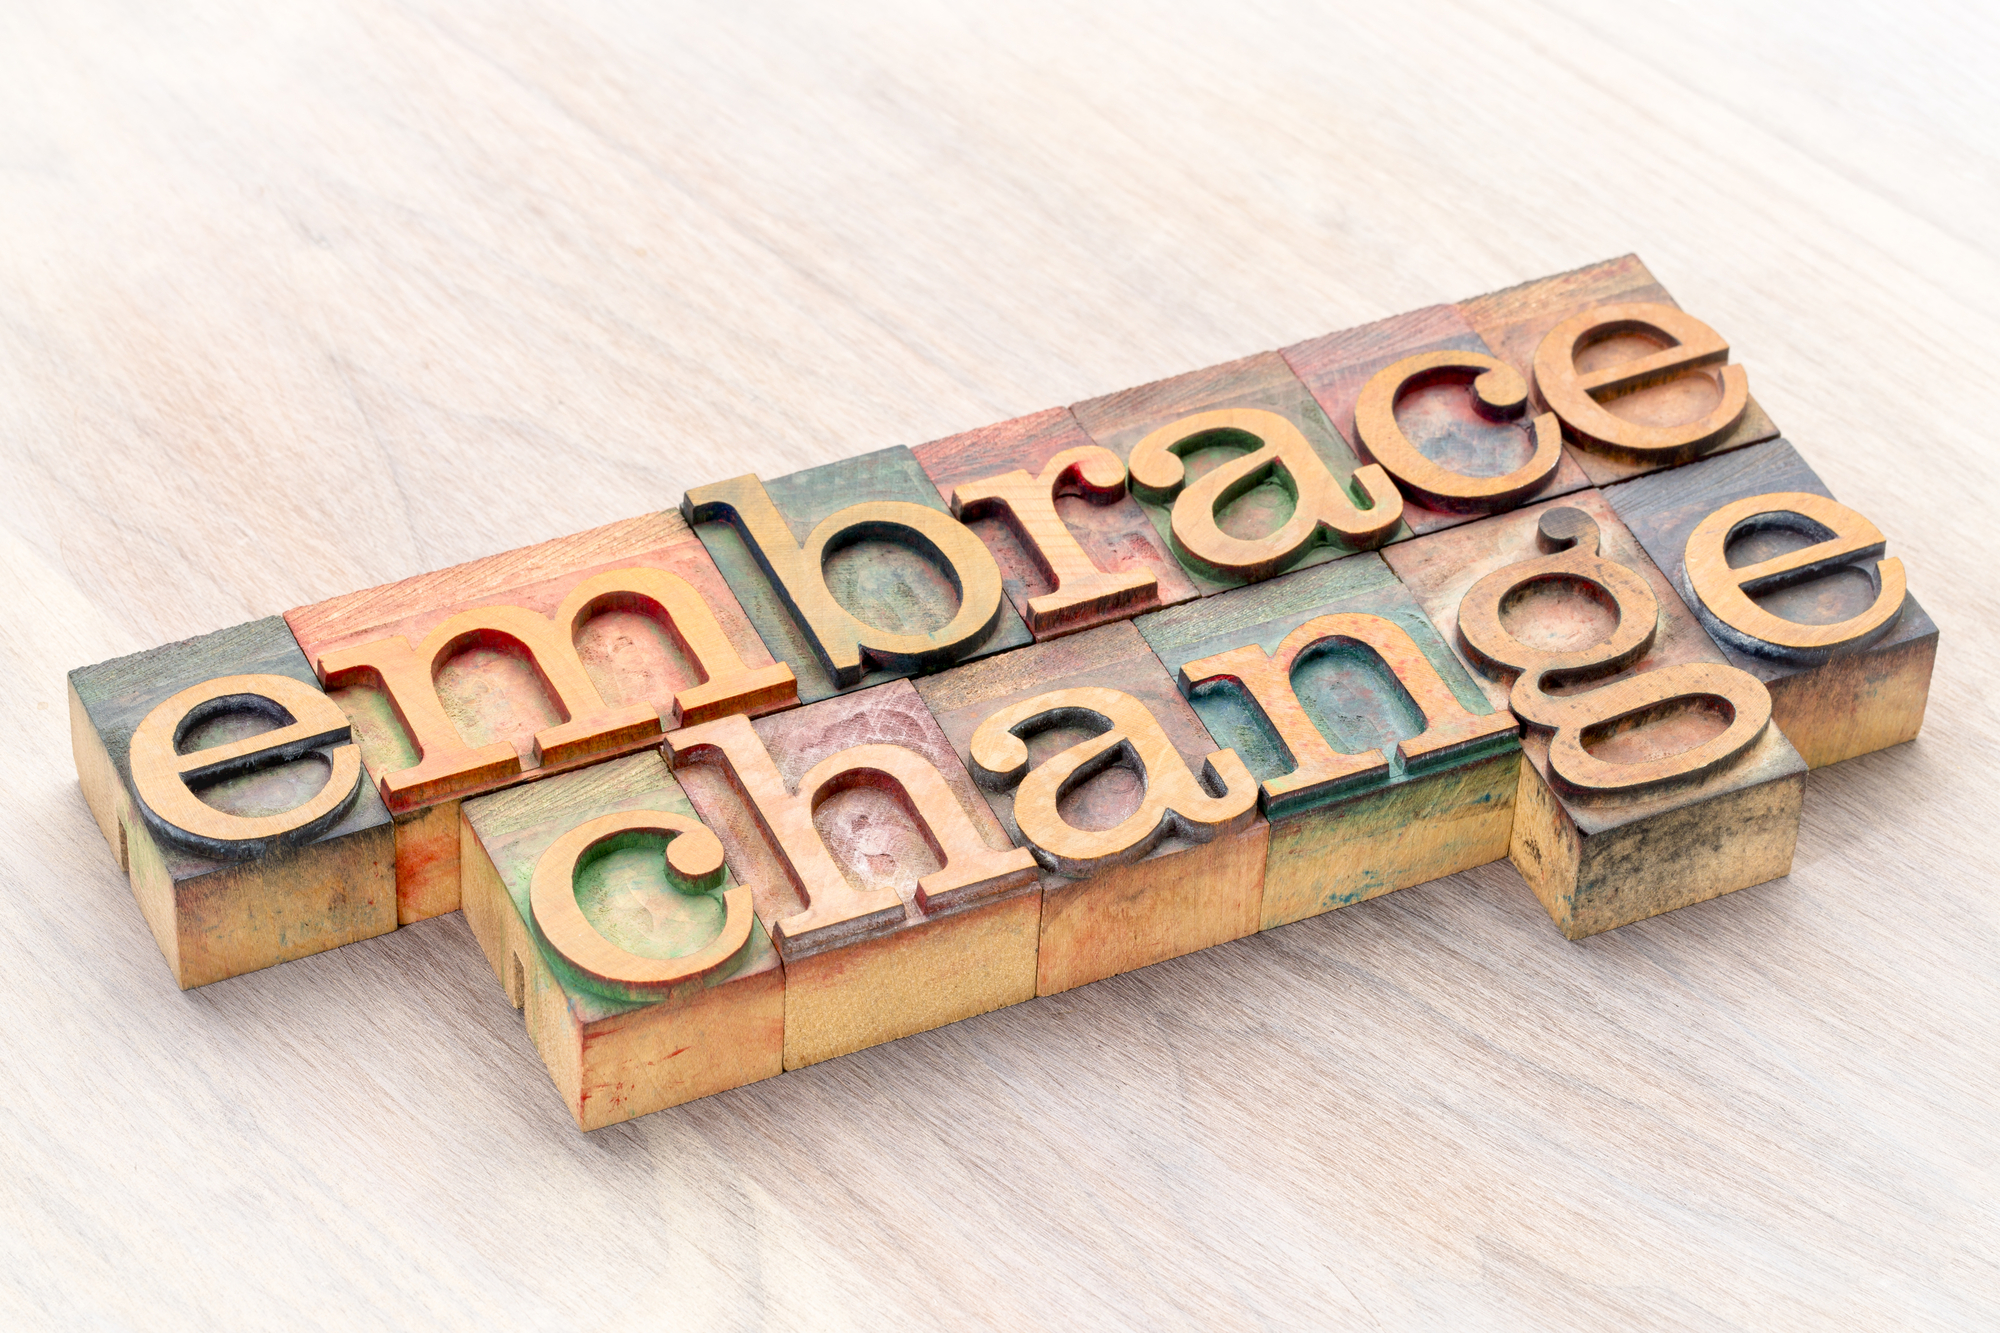 Success Happens by Embracing Change